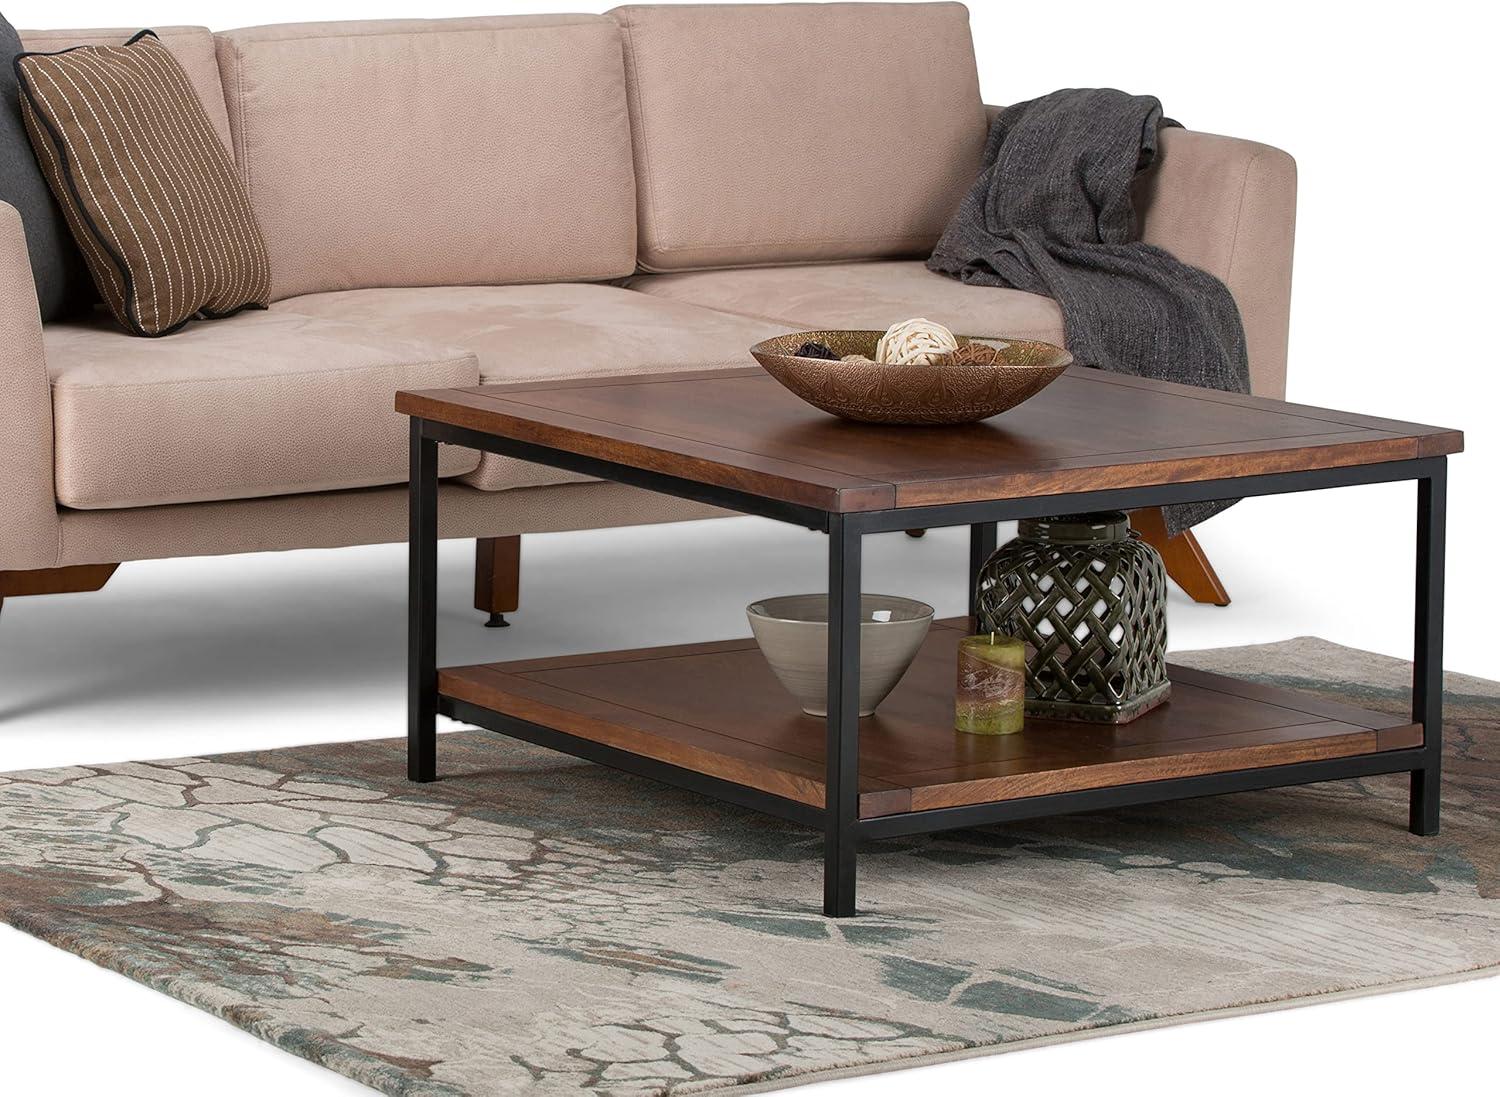 Modern Industrial Black Metal Square Coffee Table with Storage